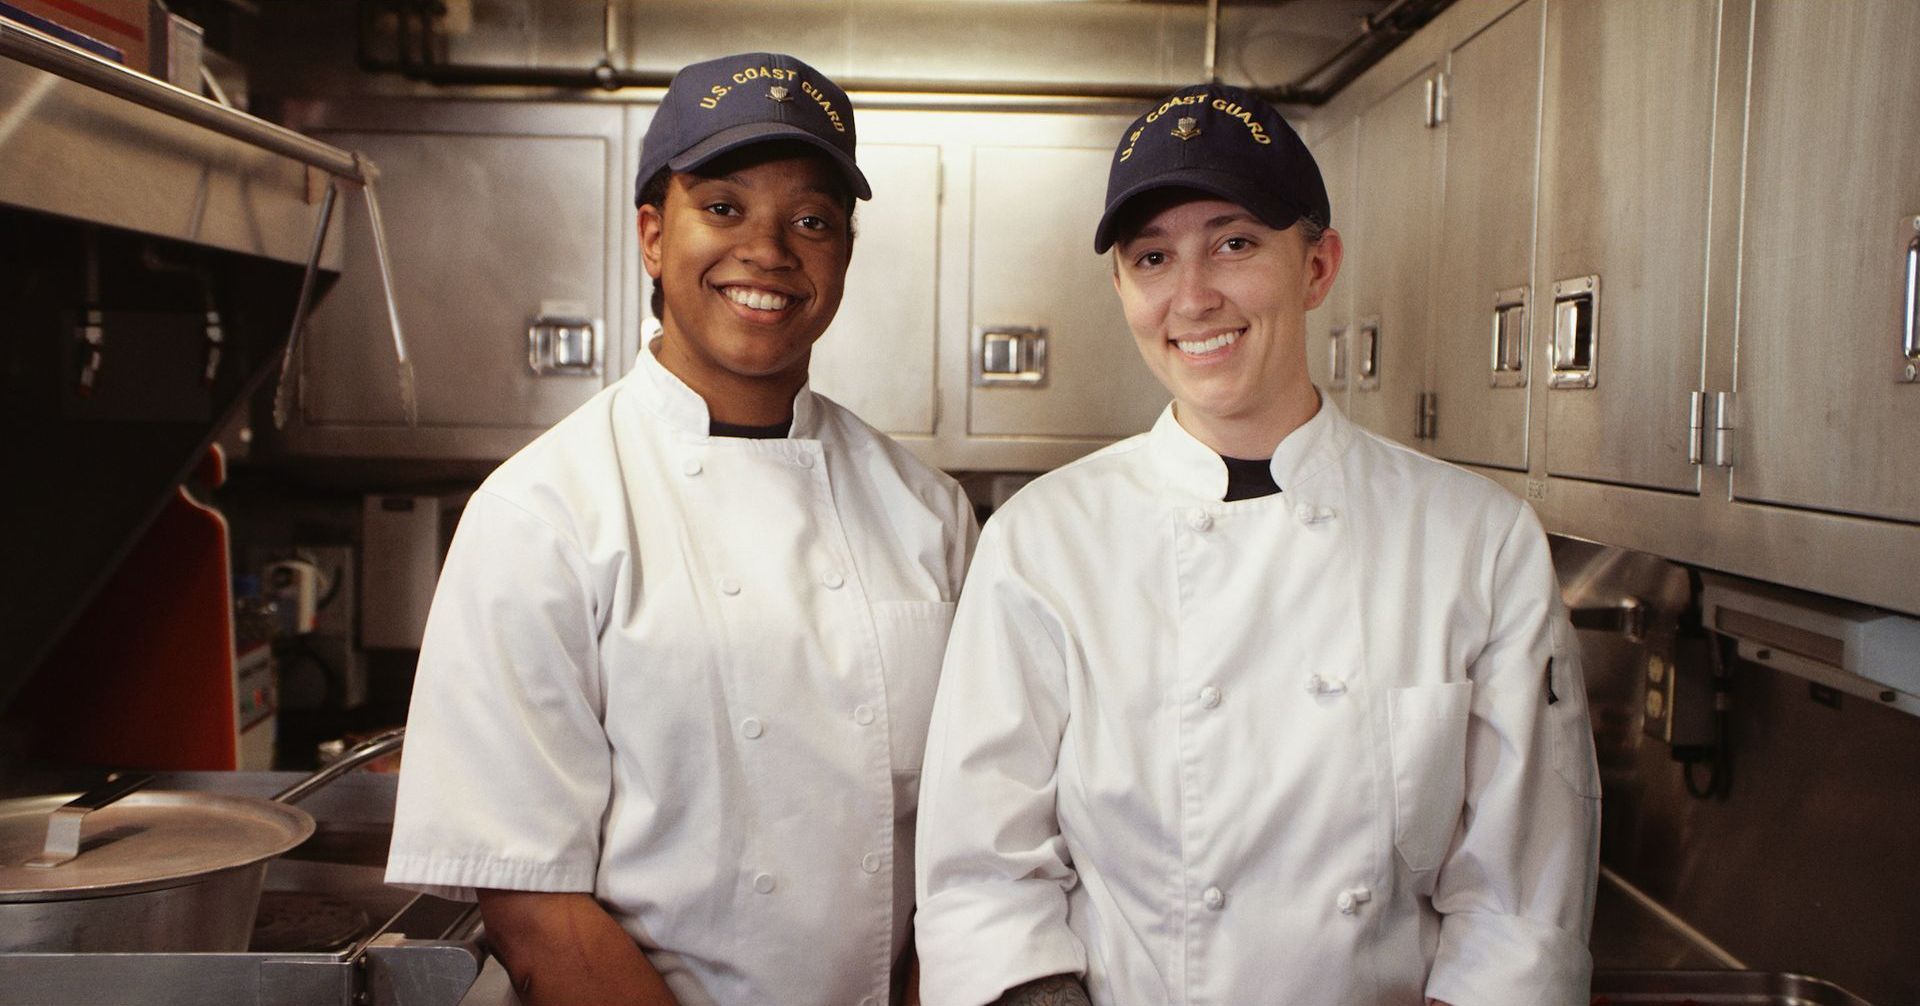 Two chefs standing next to each other in a kitchen